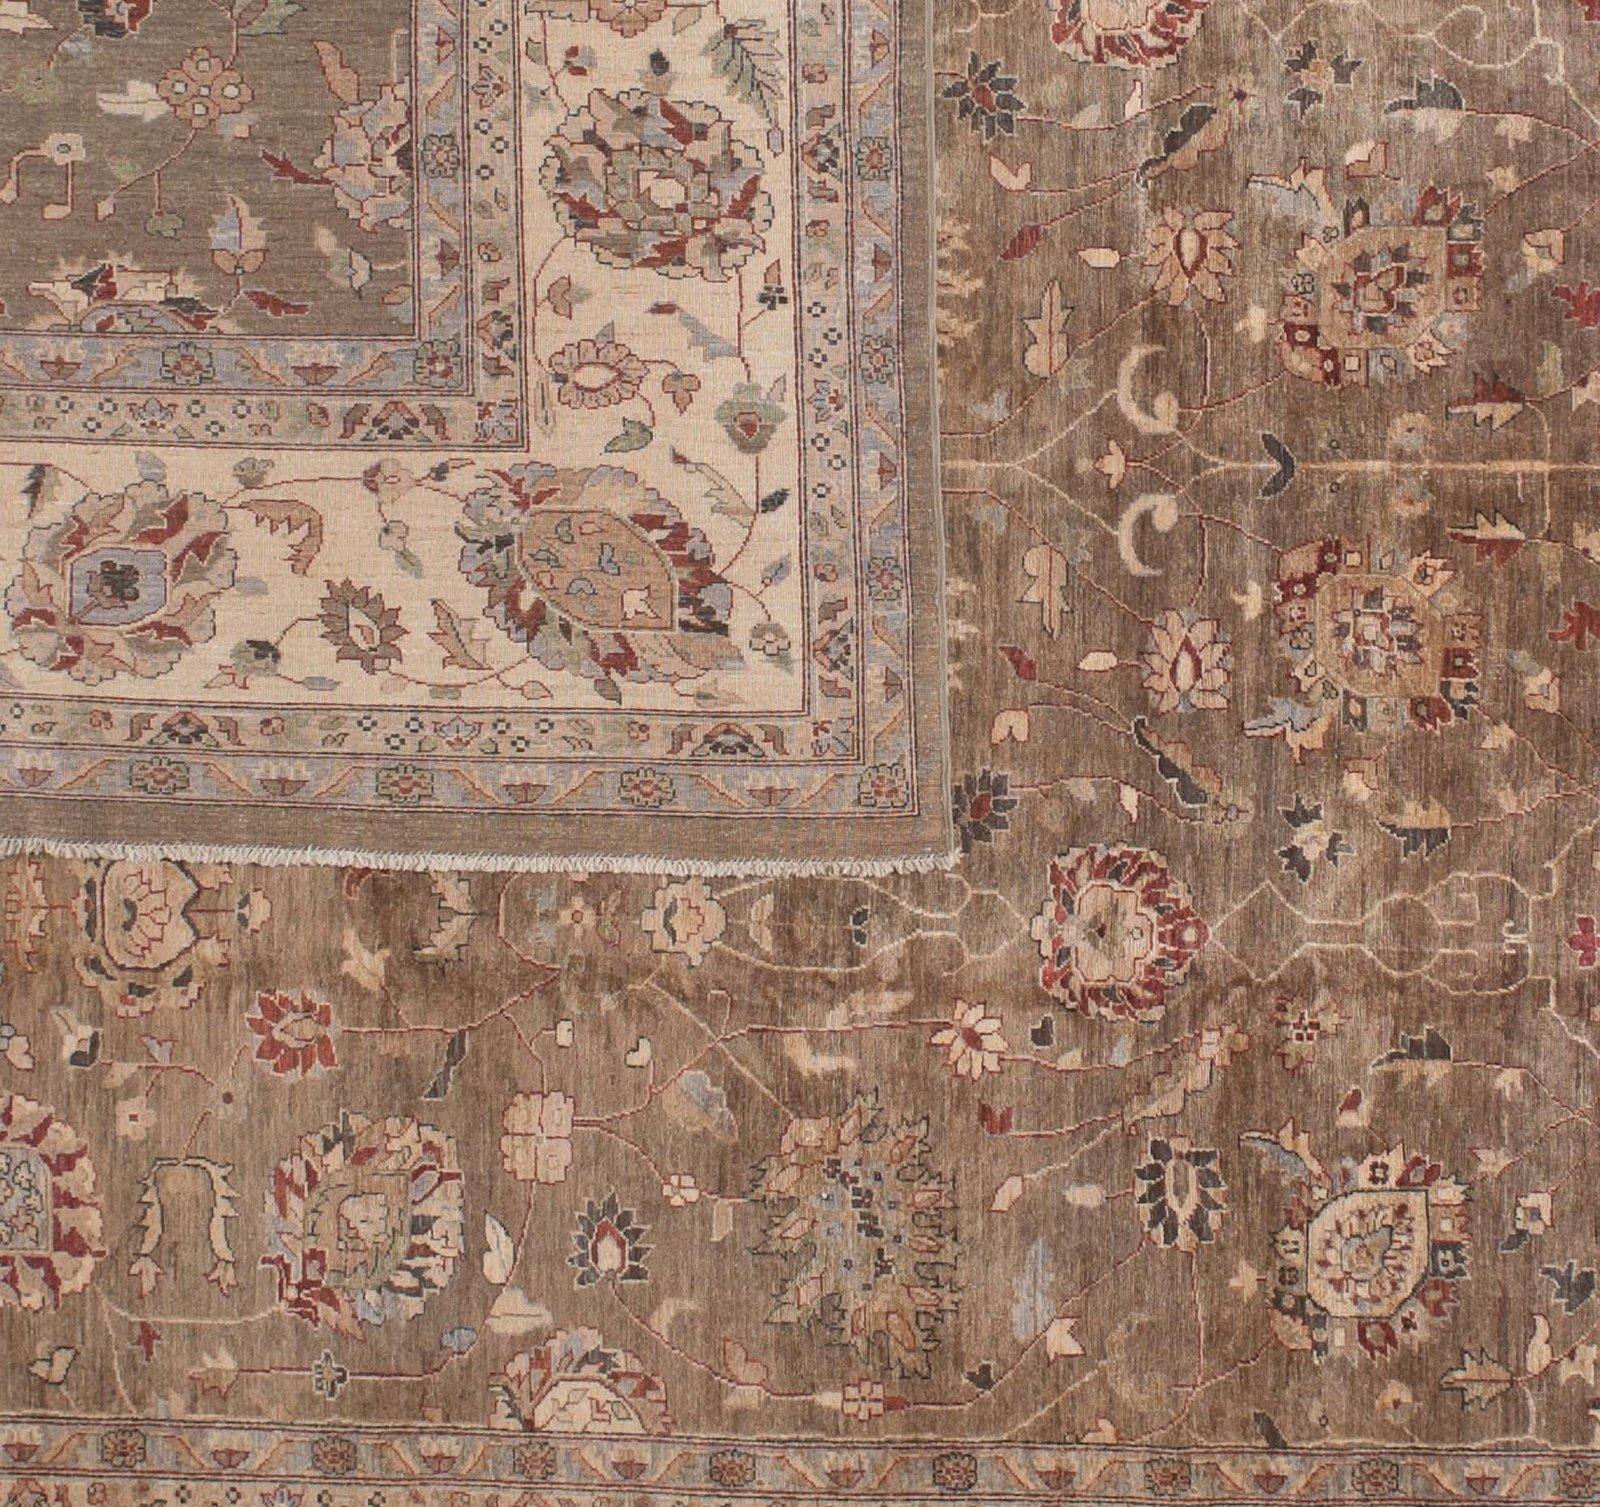 This traditional Pakistani floral motif design uses a bold and unusual palette that includes taupe, brown, teal, gray and red. The large brown center panel provides a rich background for a garden of jewels while the gold border adds additional